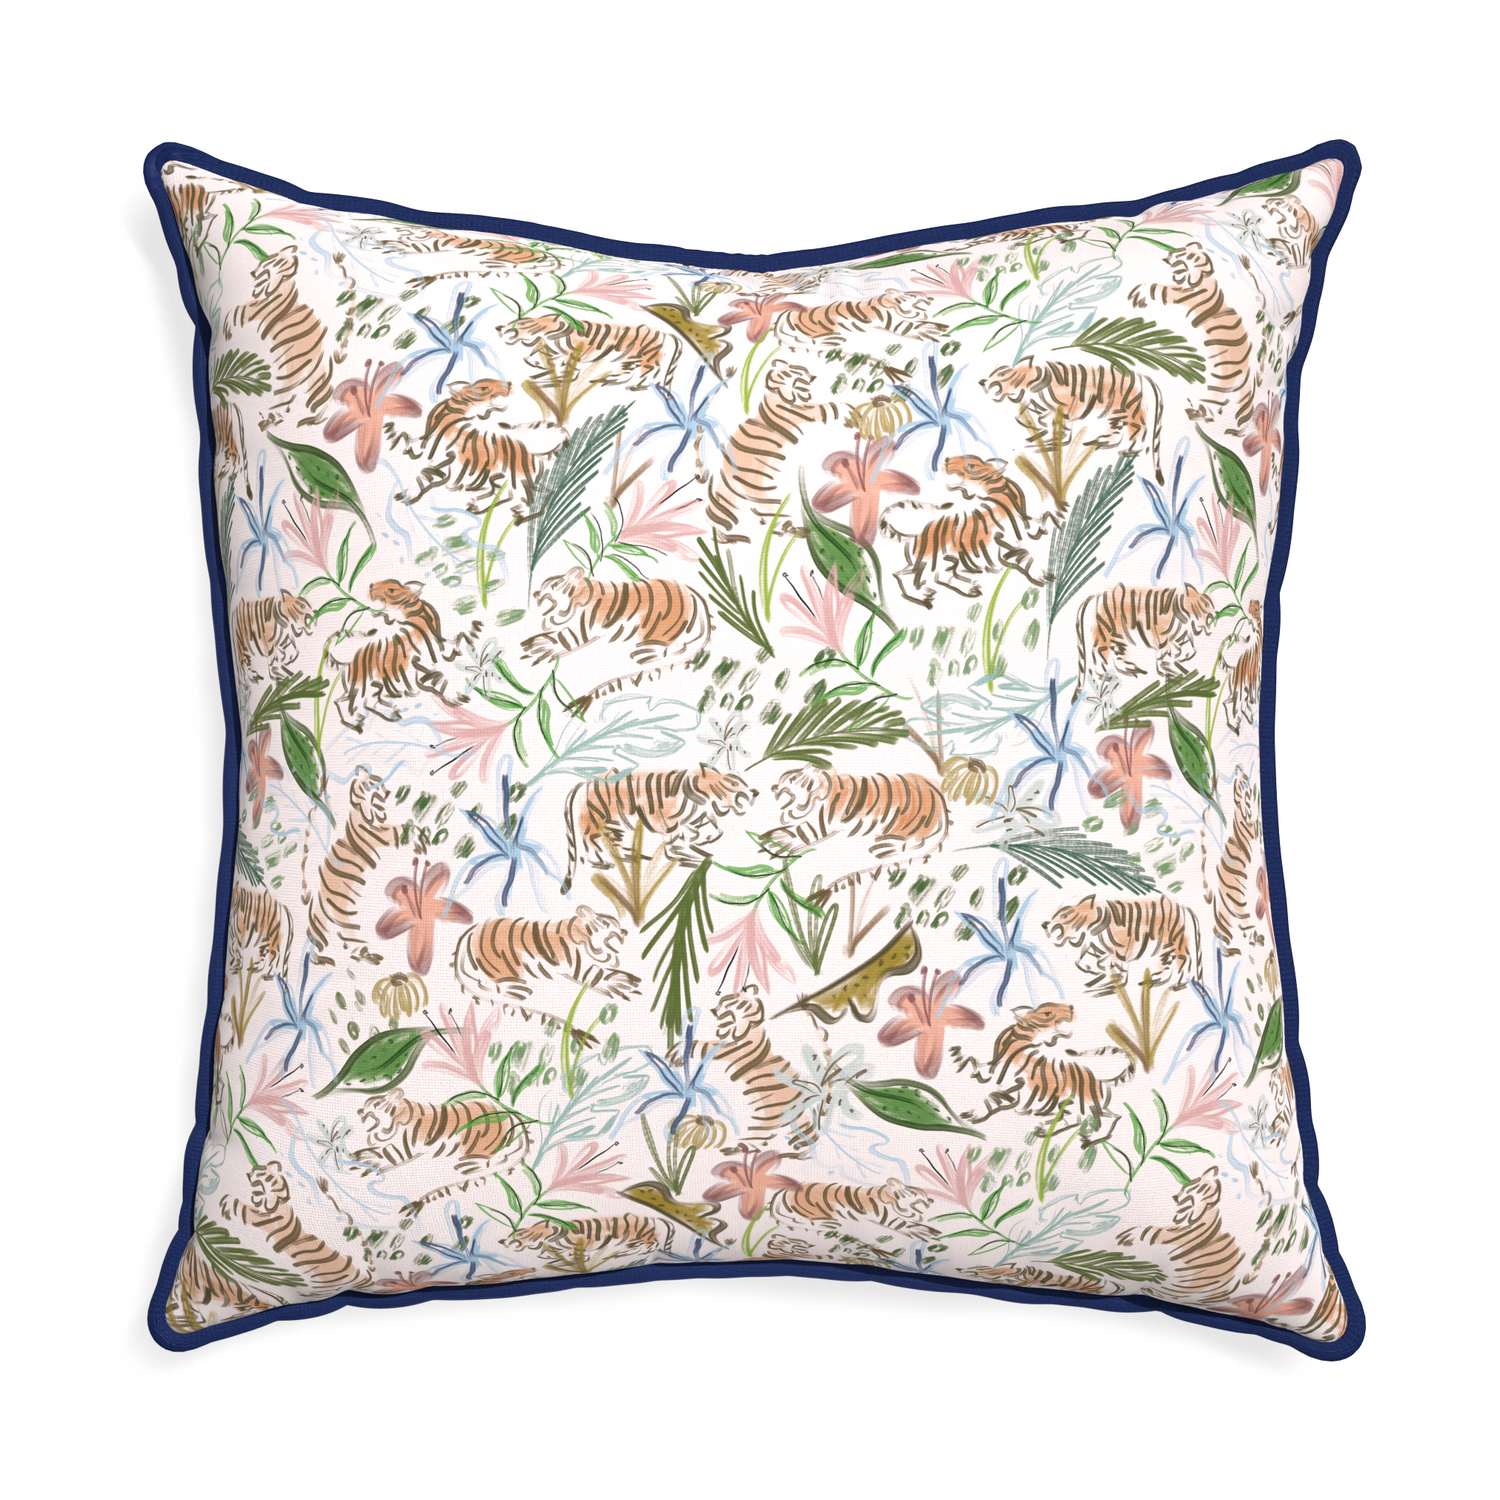 Euro-sham frida pink custom pink chinoiserie tigerpillow with midnight piping on white background